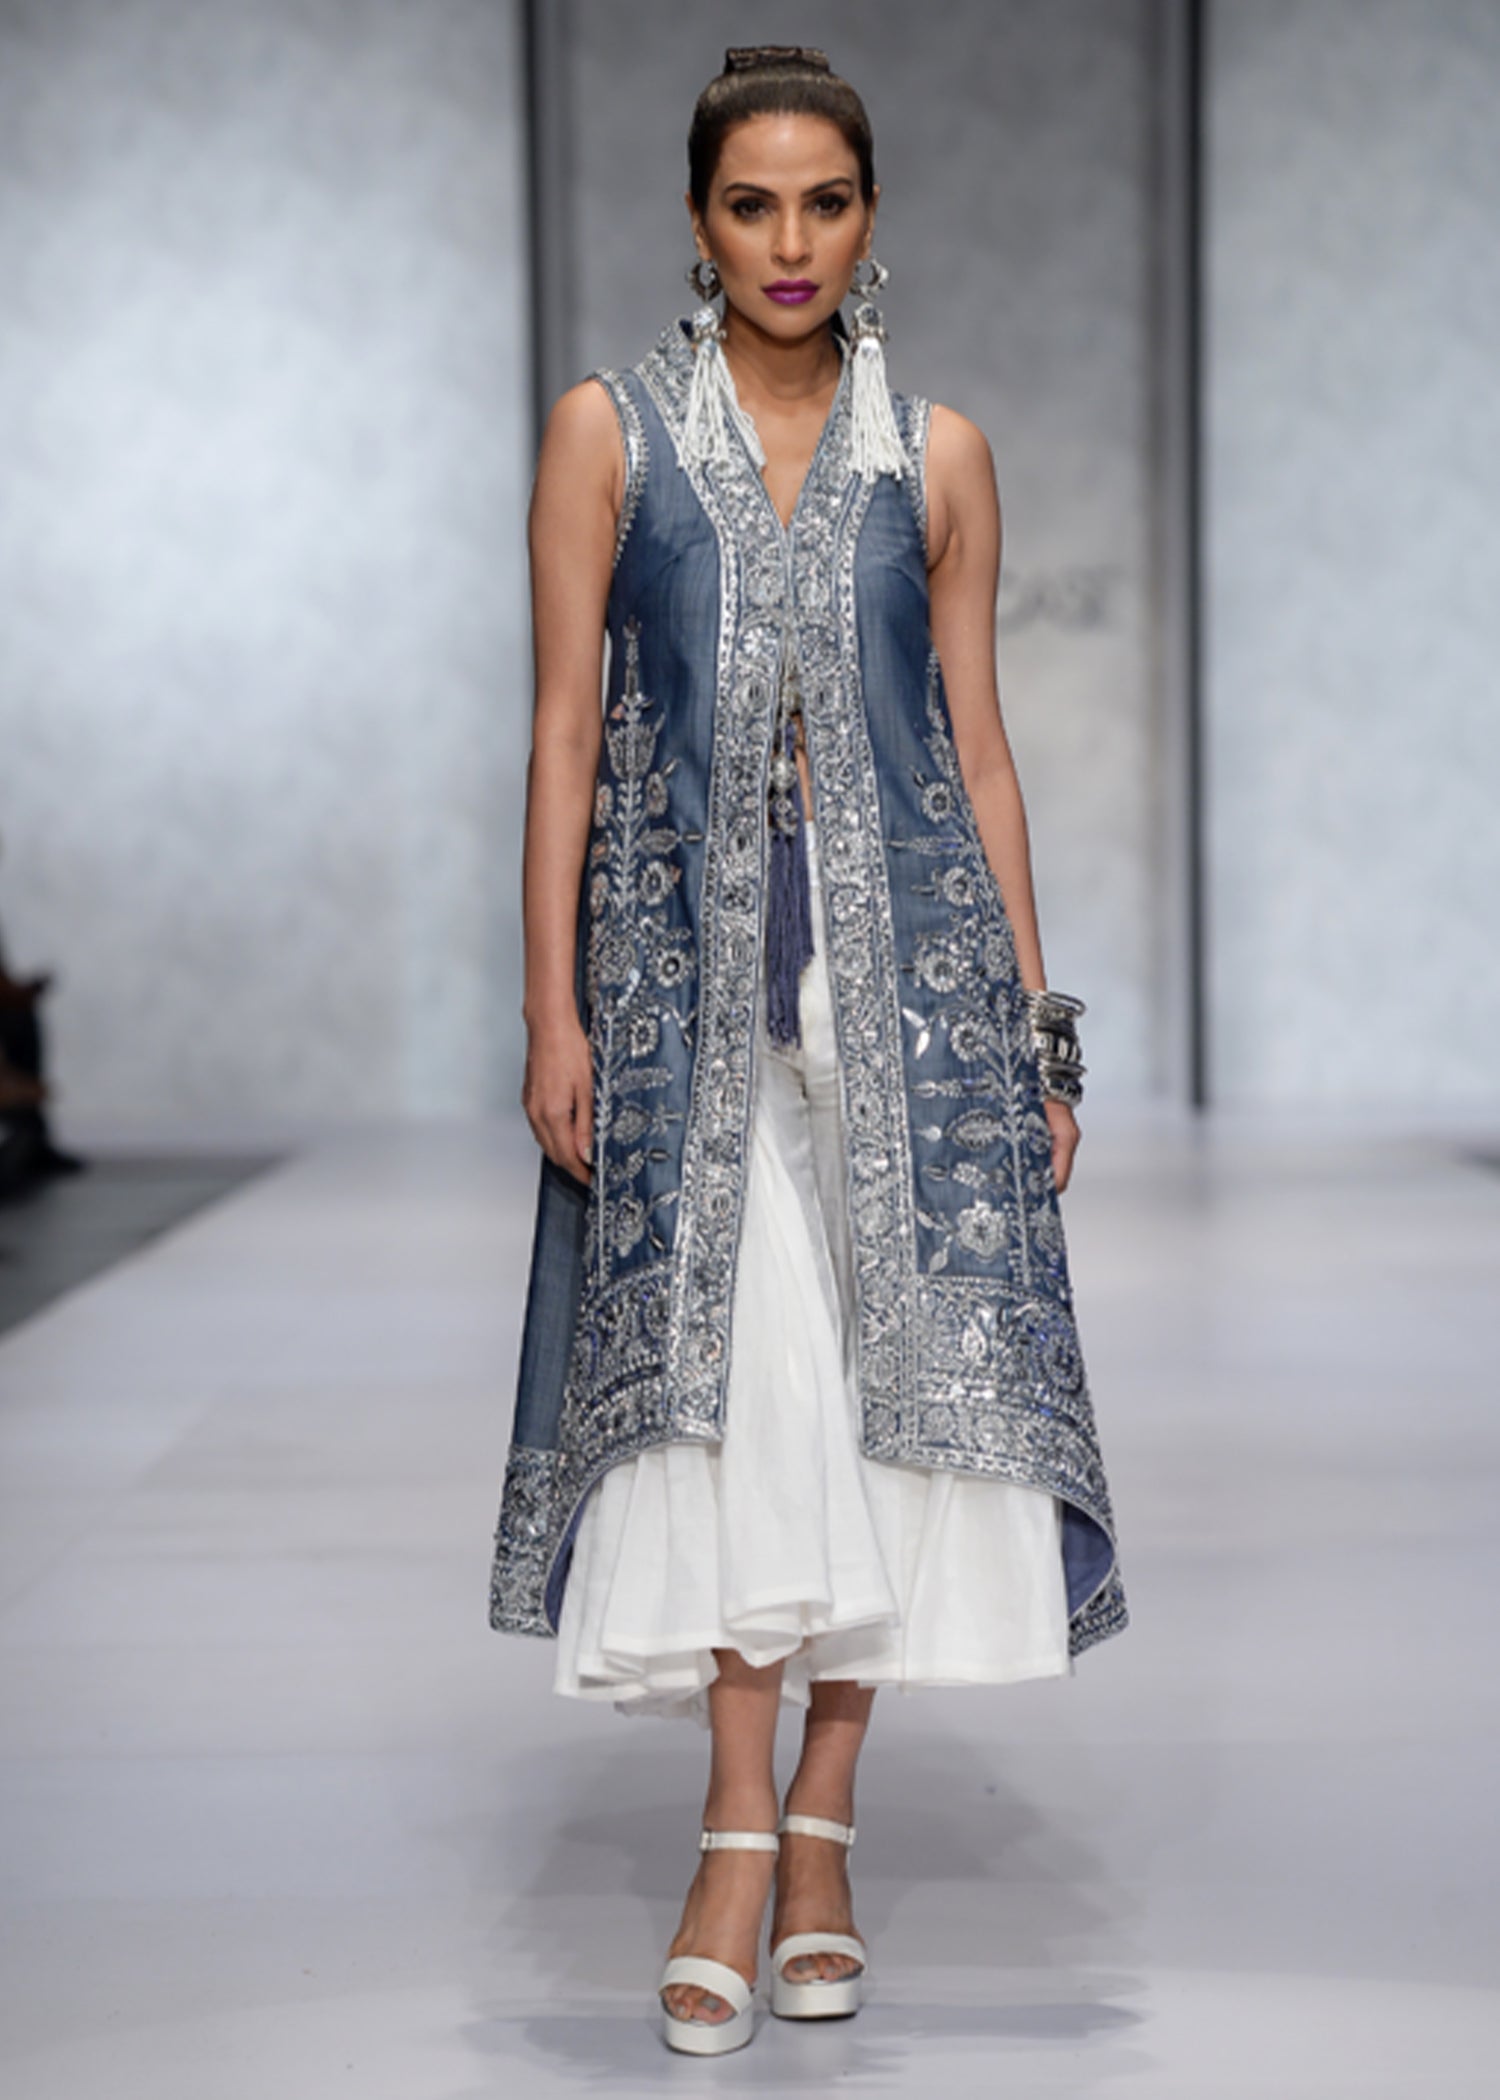 Sleeveless Long Coat with Silver-work, paired with a Lehenga